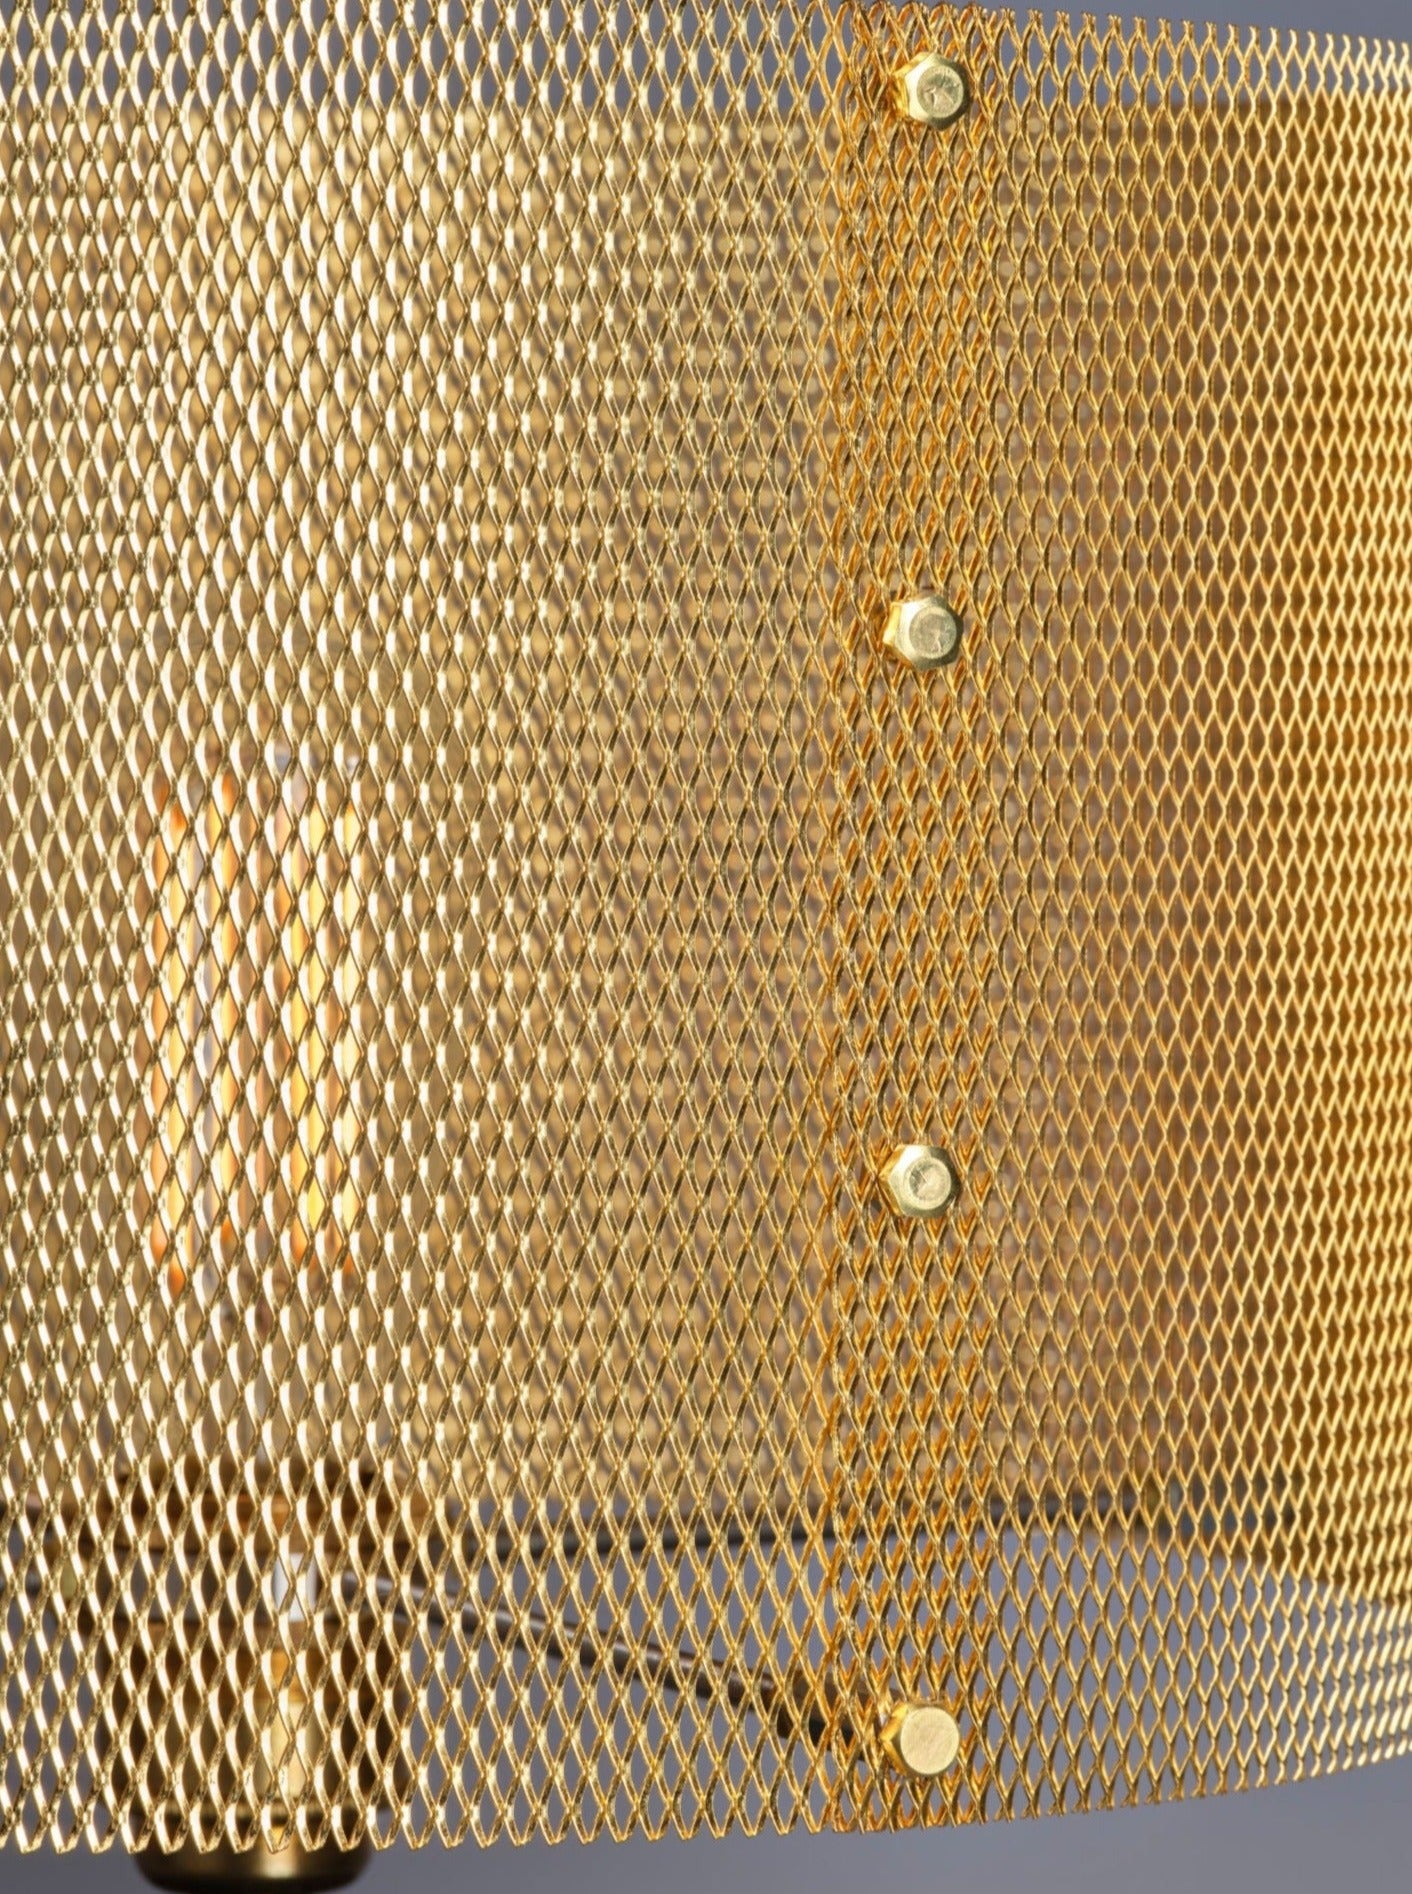 Close-up view of a Marine Breynaert Dyane Table Lamp secured with rivets, showing intricate hexagonal patterns and the shadows it casts.